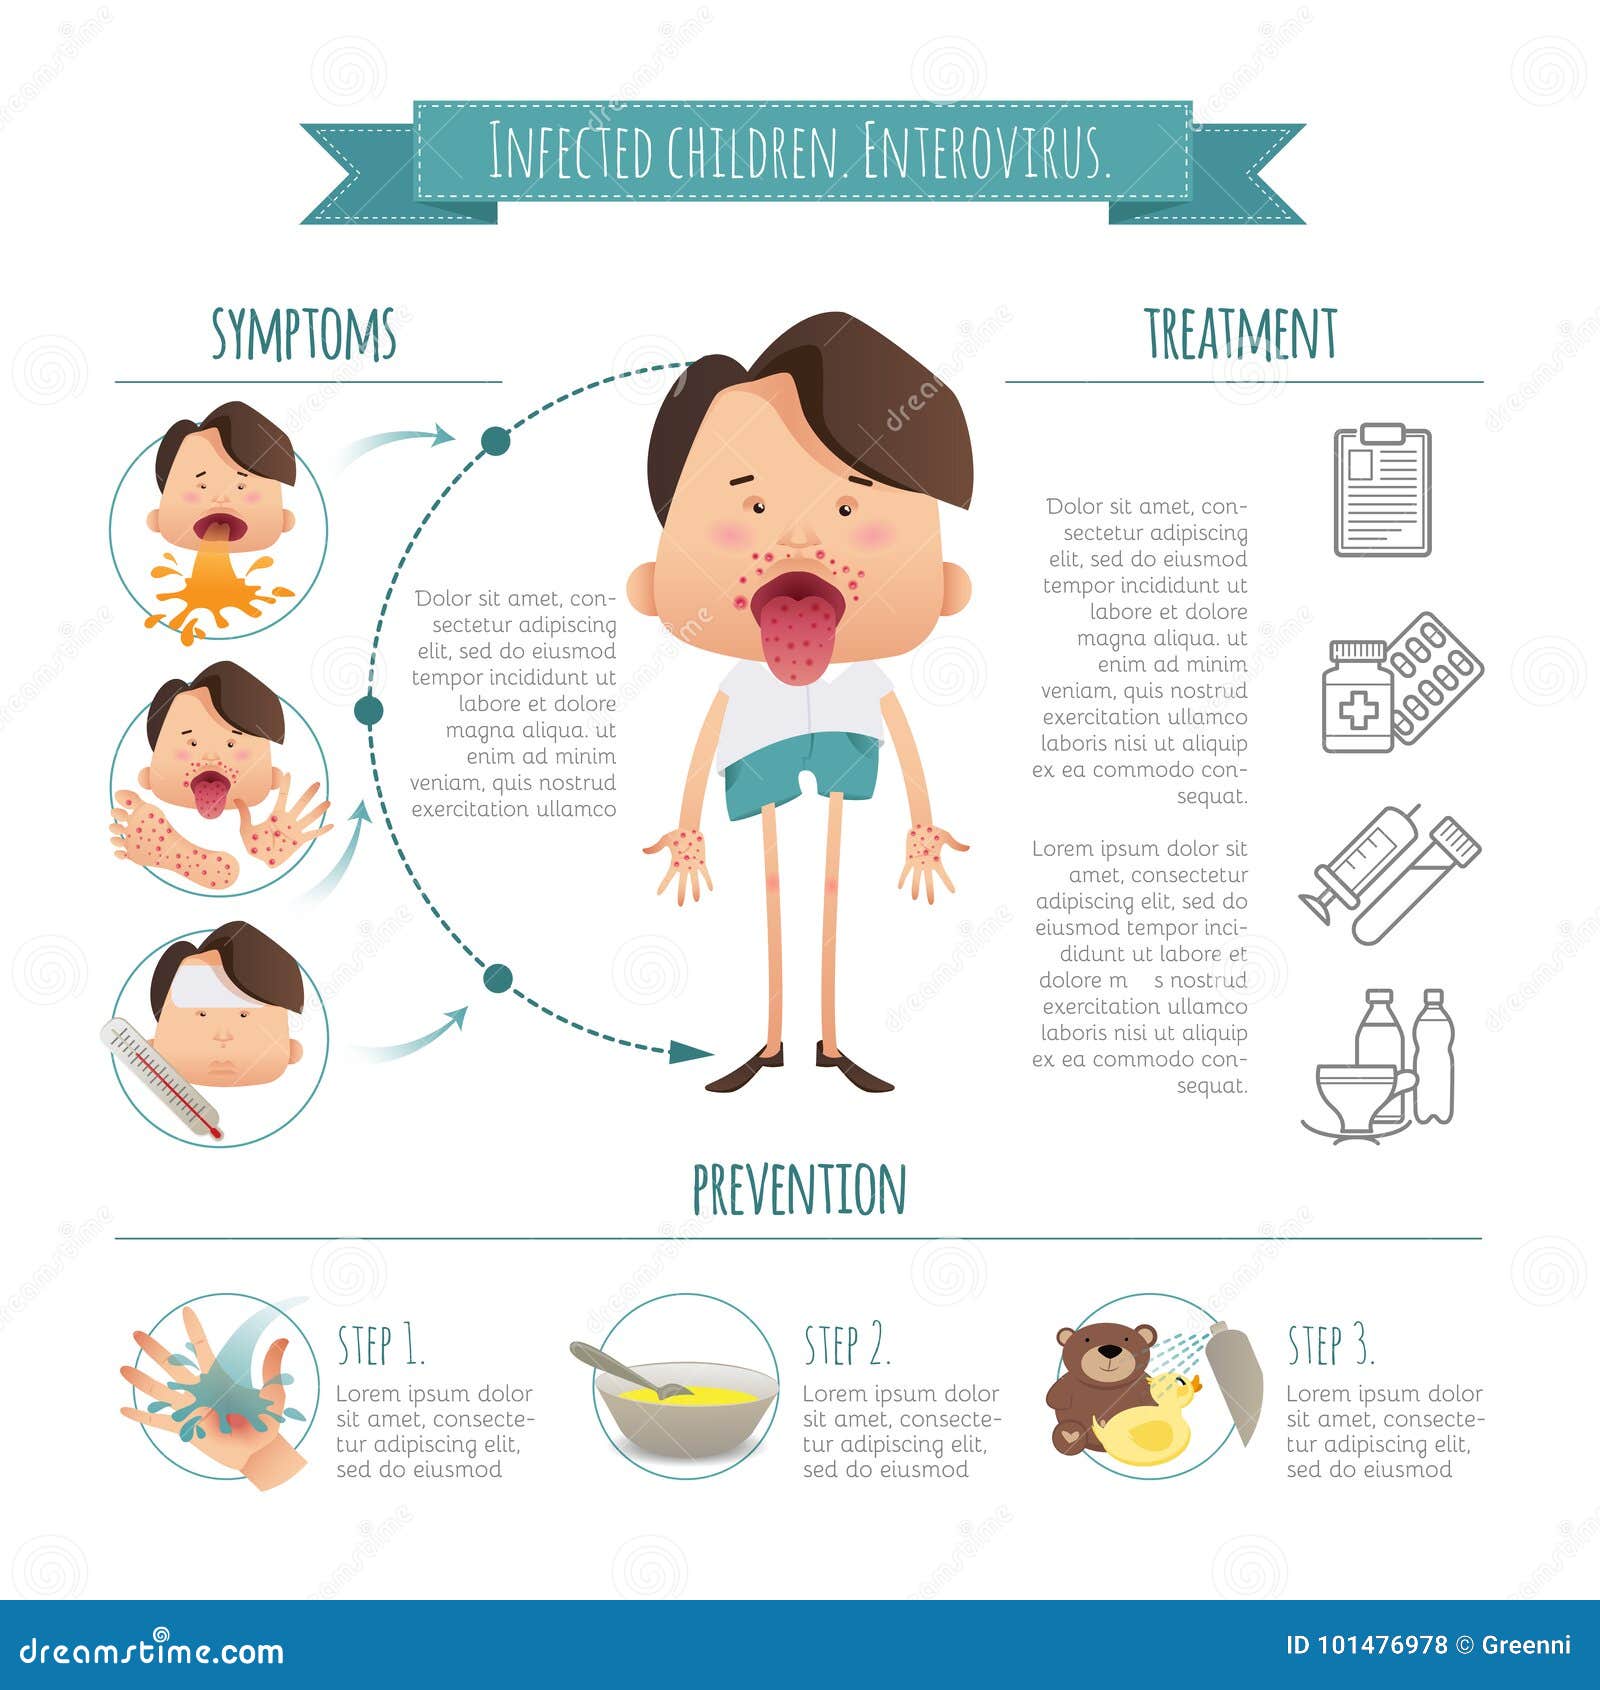 infected children. enterovirus. hand-foot-mouth disease infographics. symptoms, prevention and treatment. poster detail